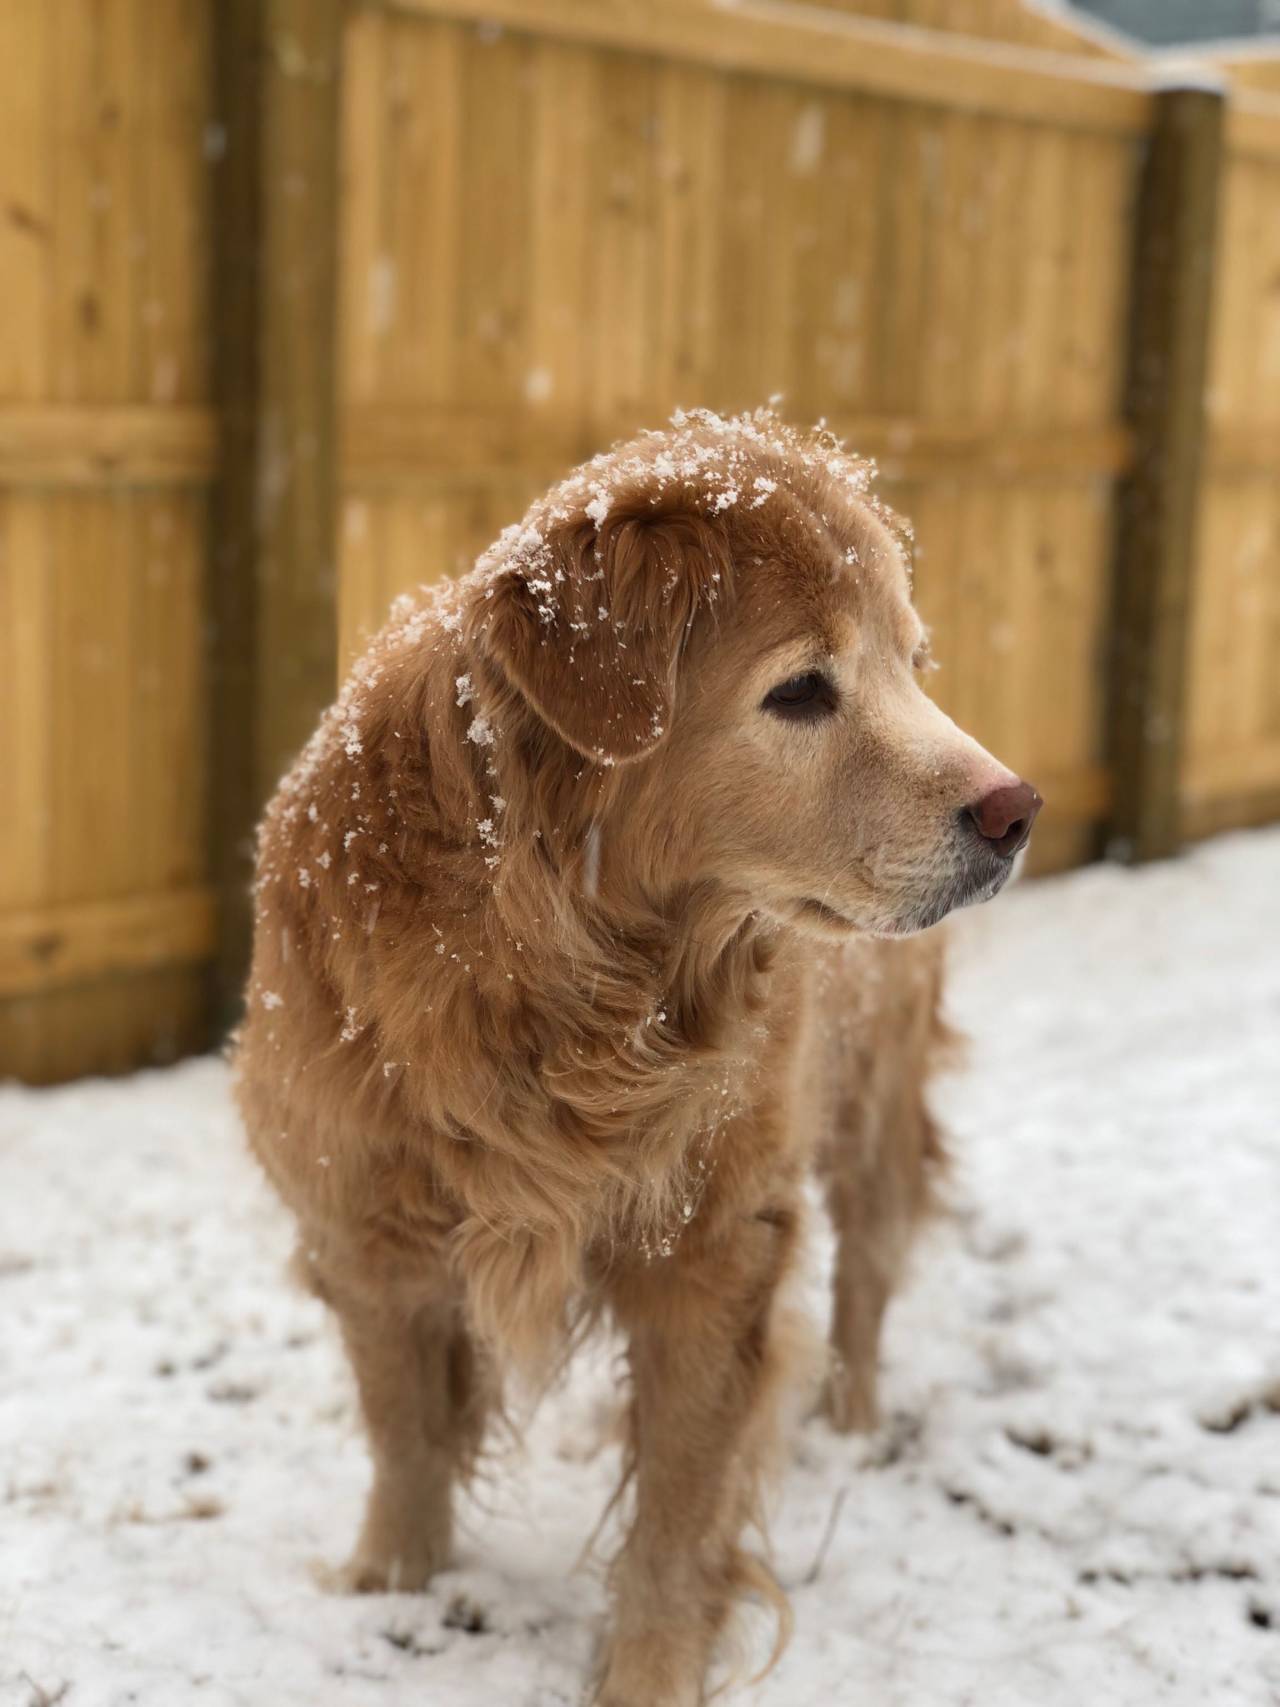 She’s getting old, but still makes a good snow pup
Source: http://bit.ly/2DvMXSW